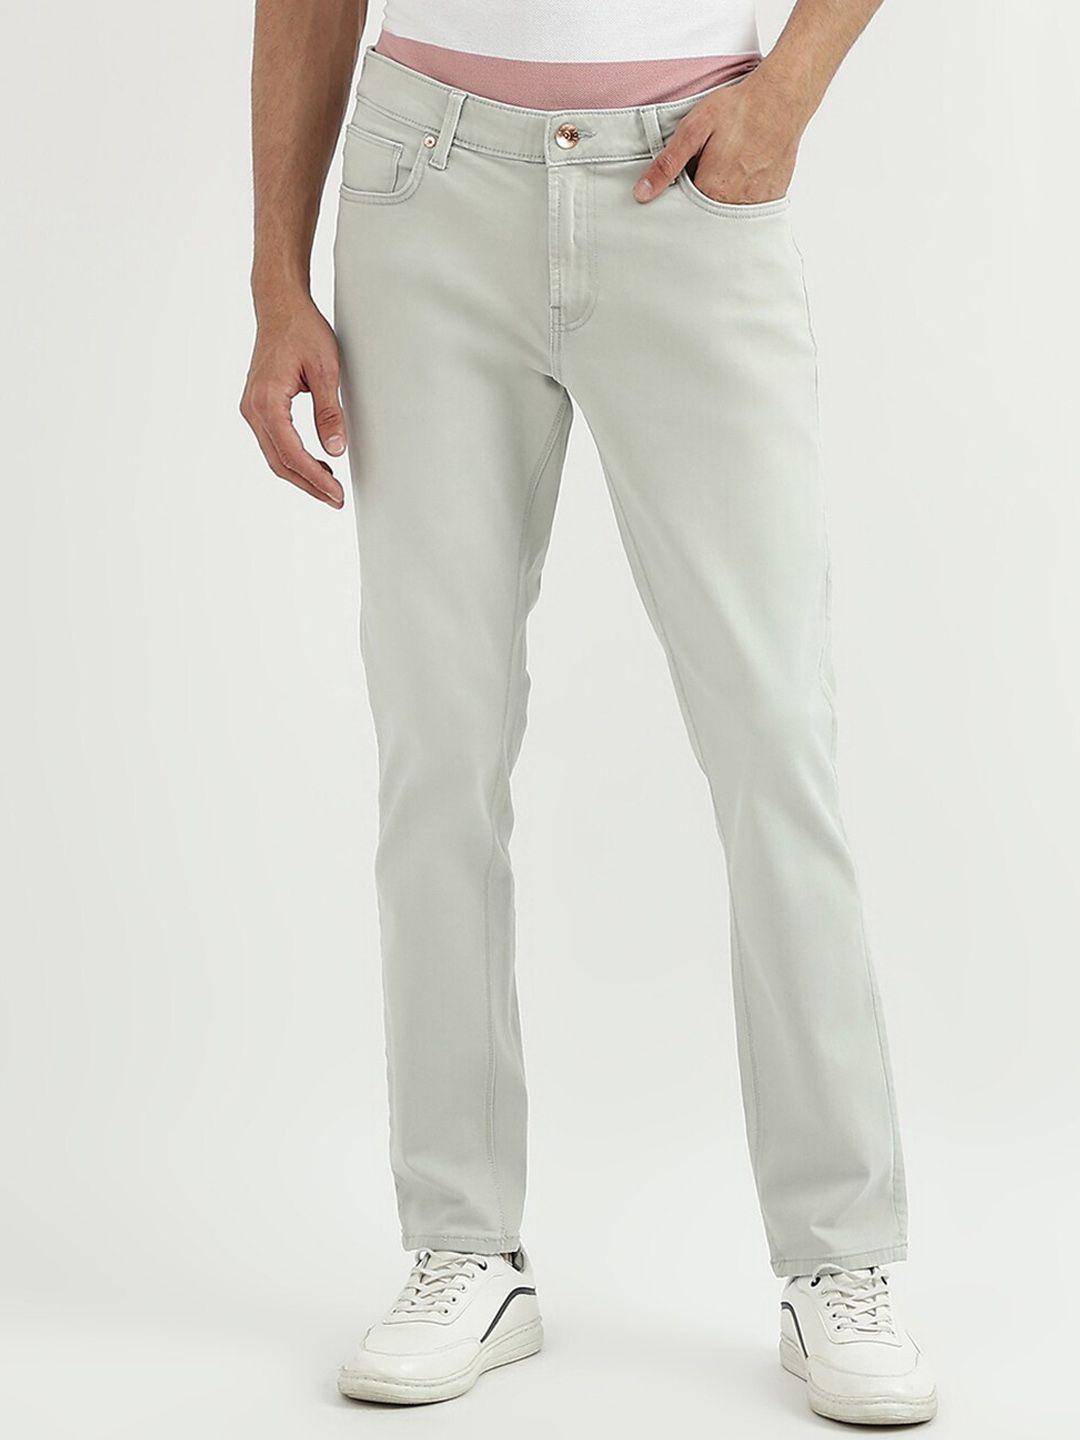 united-colors-of-benetton-men-off-white-skinny-fit-jeans